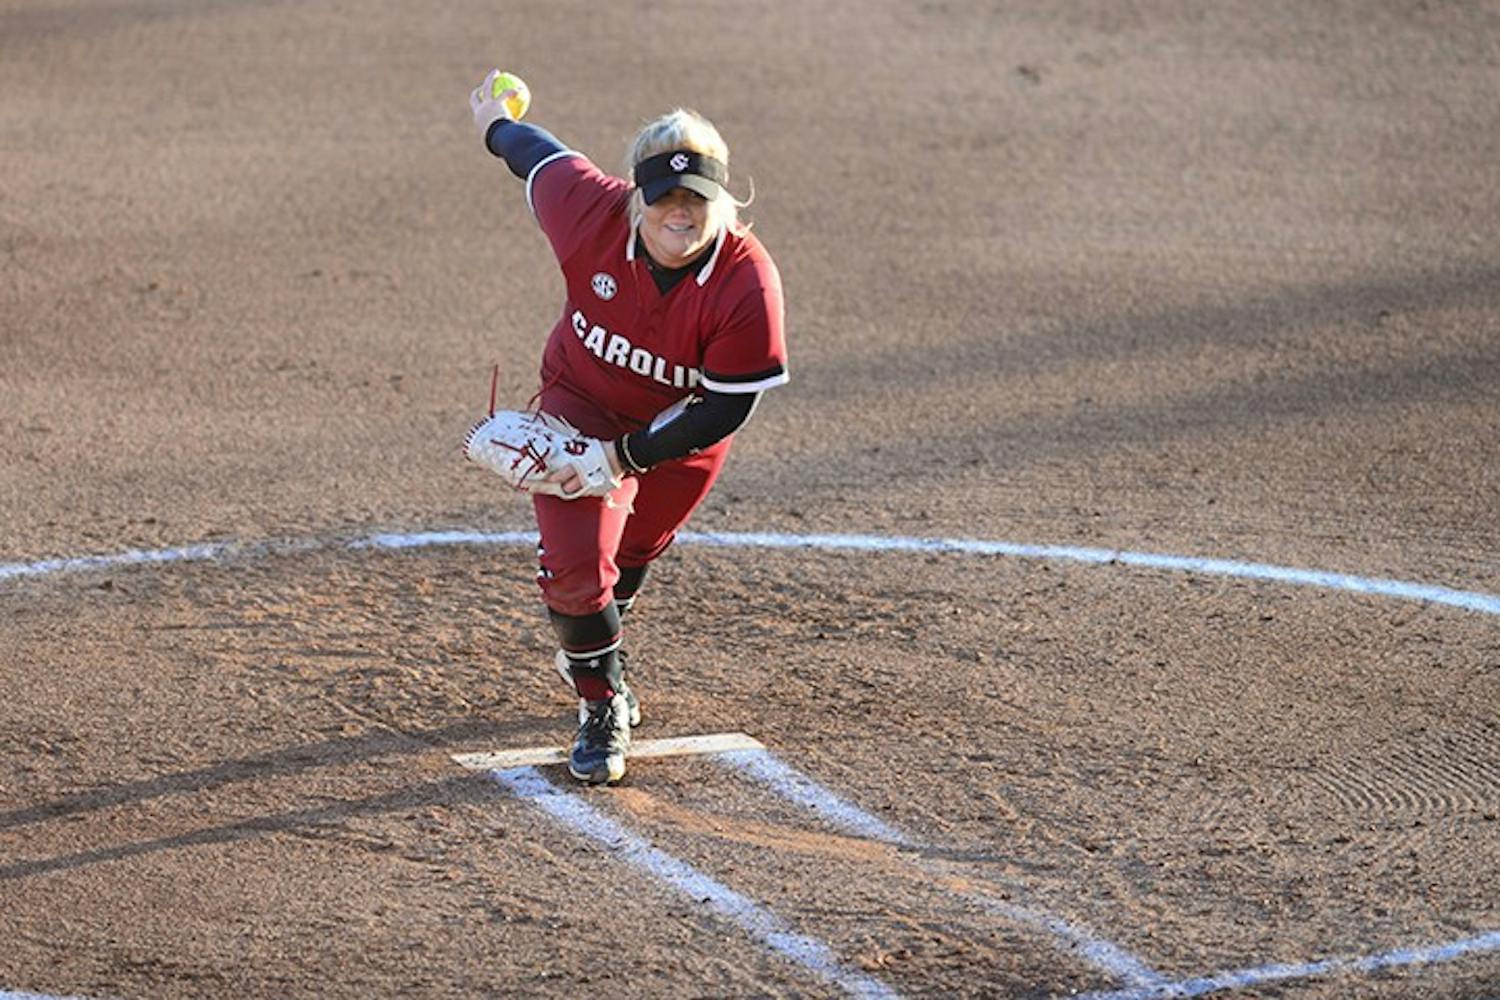 Graduate student pitcher Cayla Drotar winds up to pitch. The Gamecocks will face North Carolina in their 鶹С򽴫ý opener on Feb. 12.